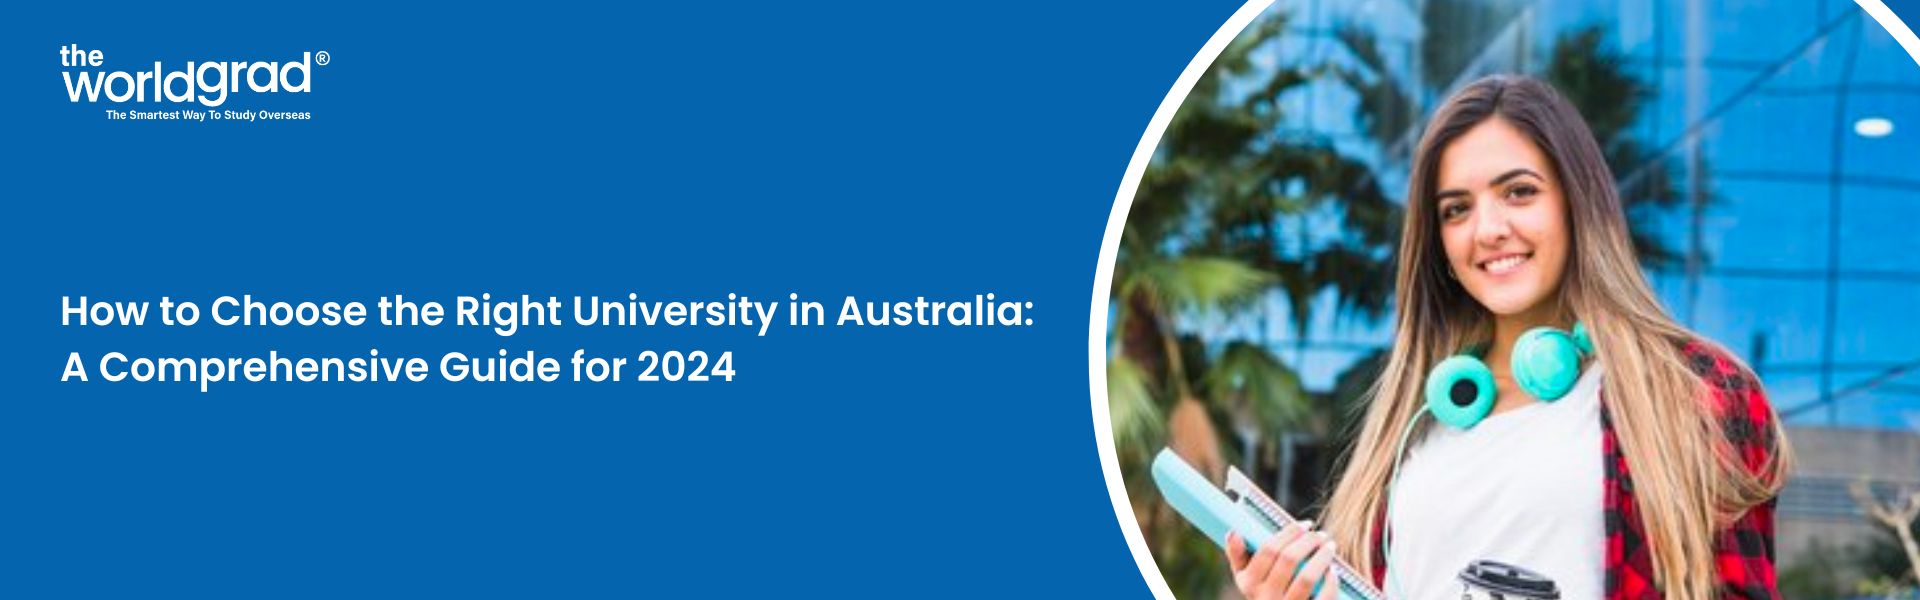 How to Choose the Right University in Australia: A Comprehensive Guide for 2024